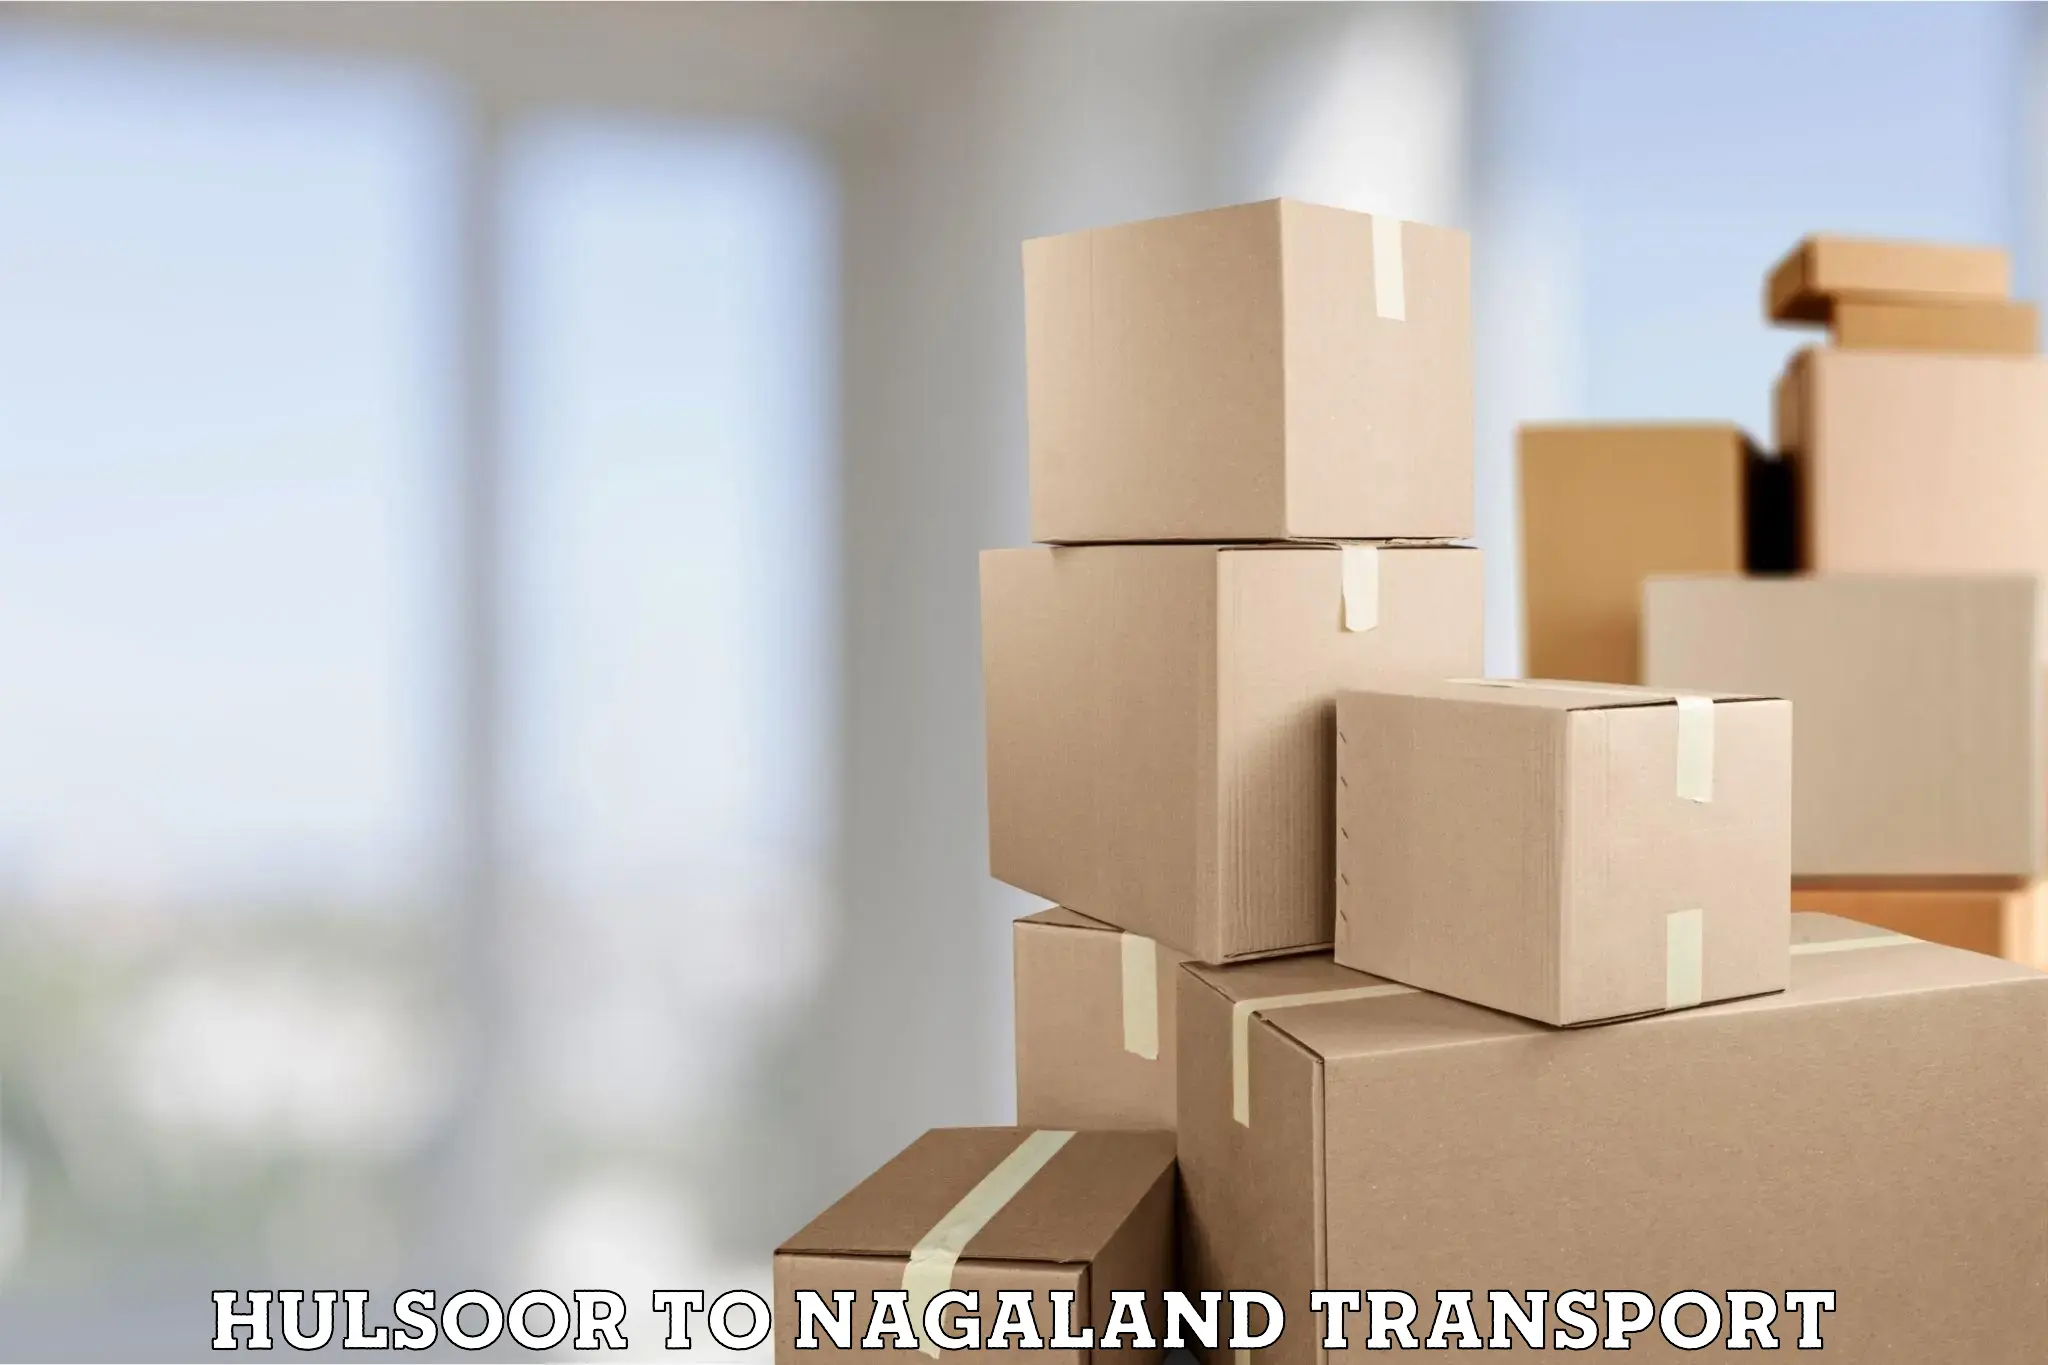 Road transport services in Hulsoor to Nagaland